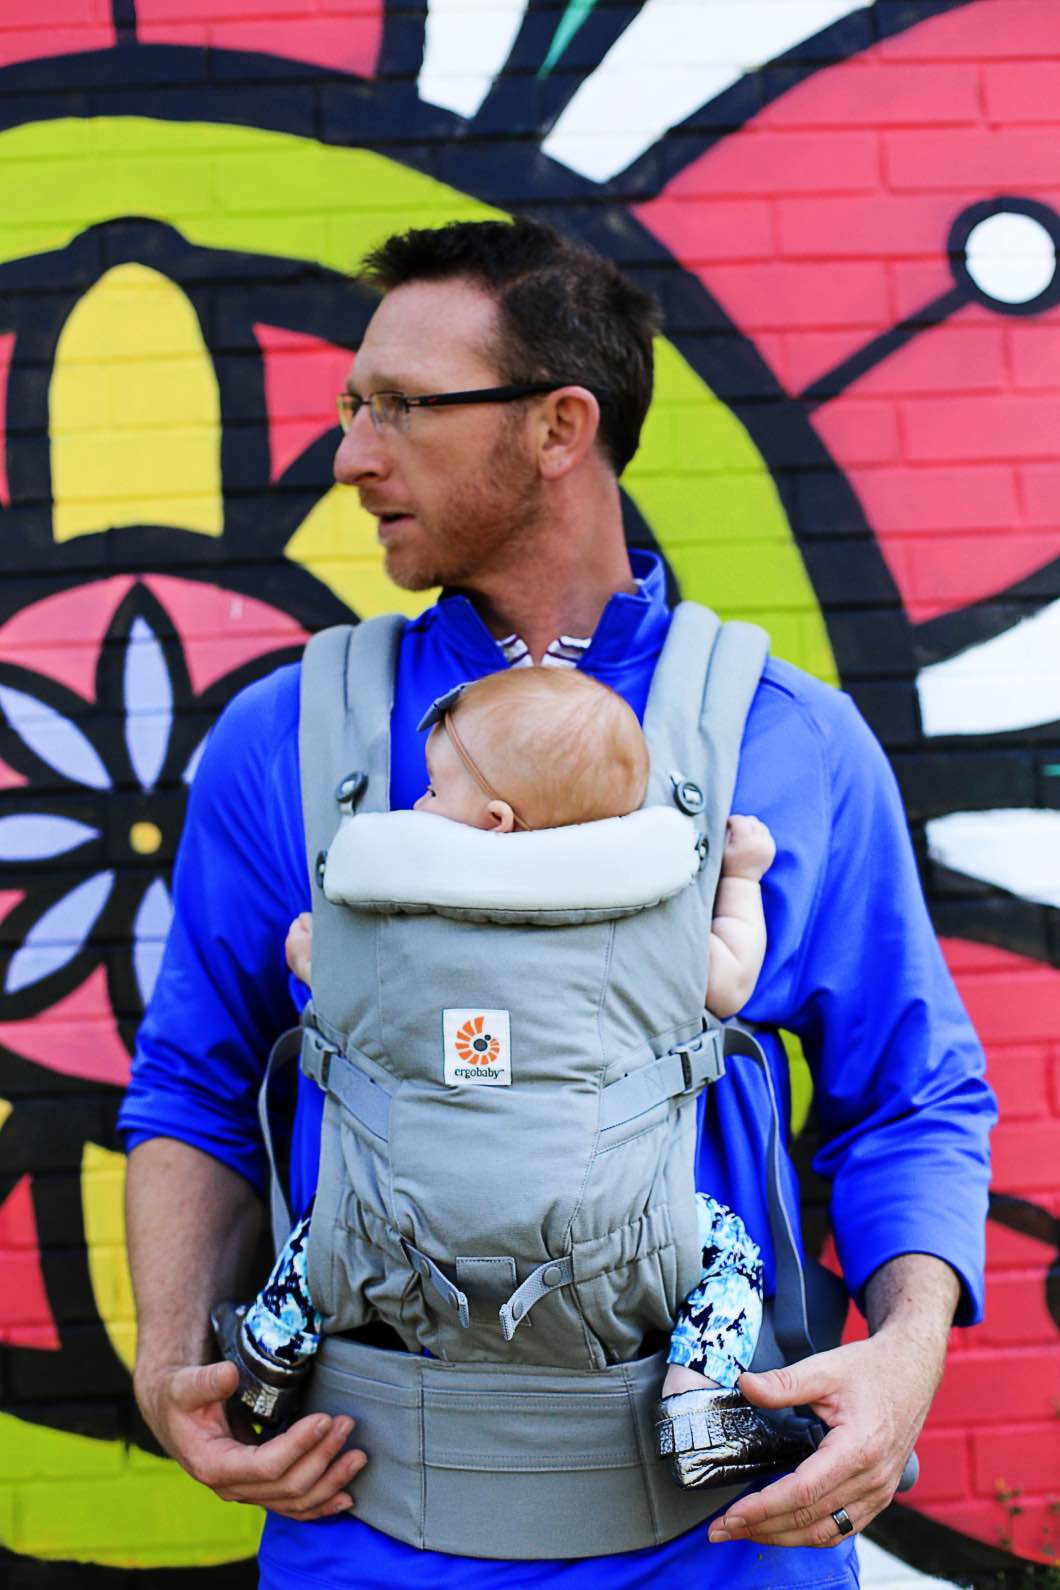 Ergobaby ADAPT Carrier Review